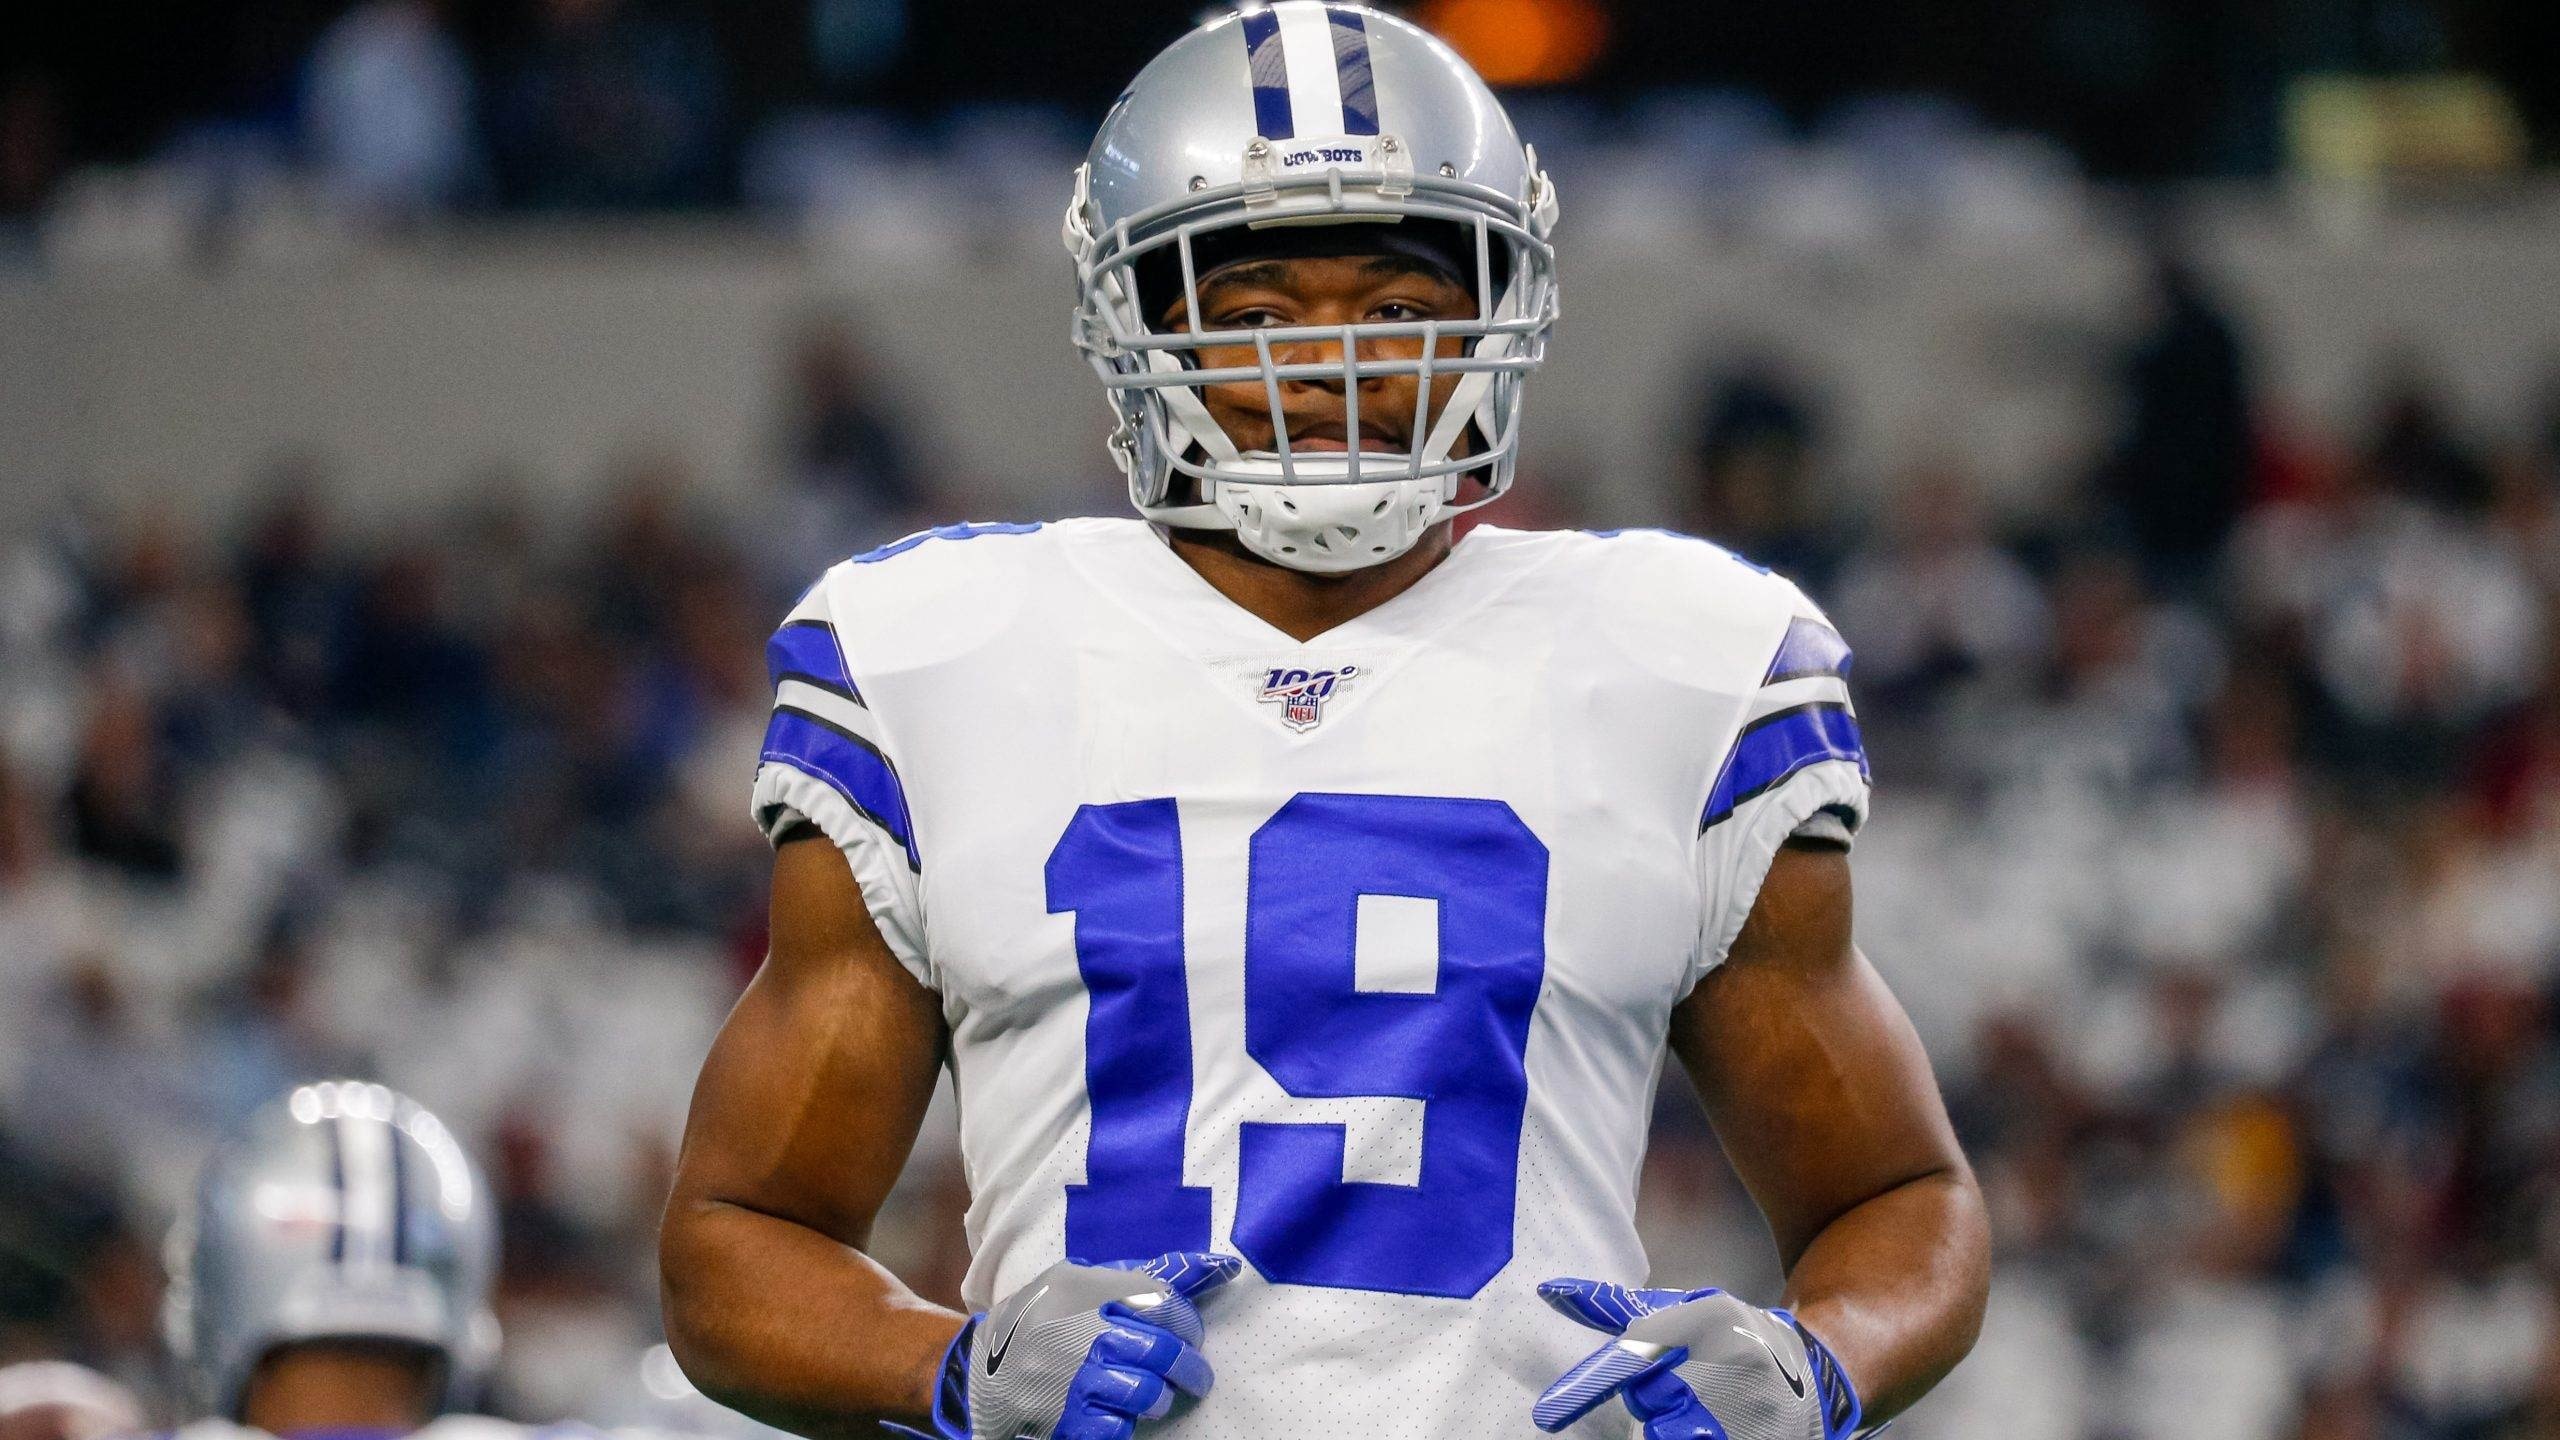 NFL Wide Receiver Amari Cooper’s Jaw-Dropping Net Worth Will Make You Drool: Bio, Age, Career in 2023